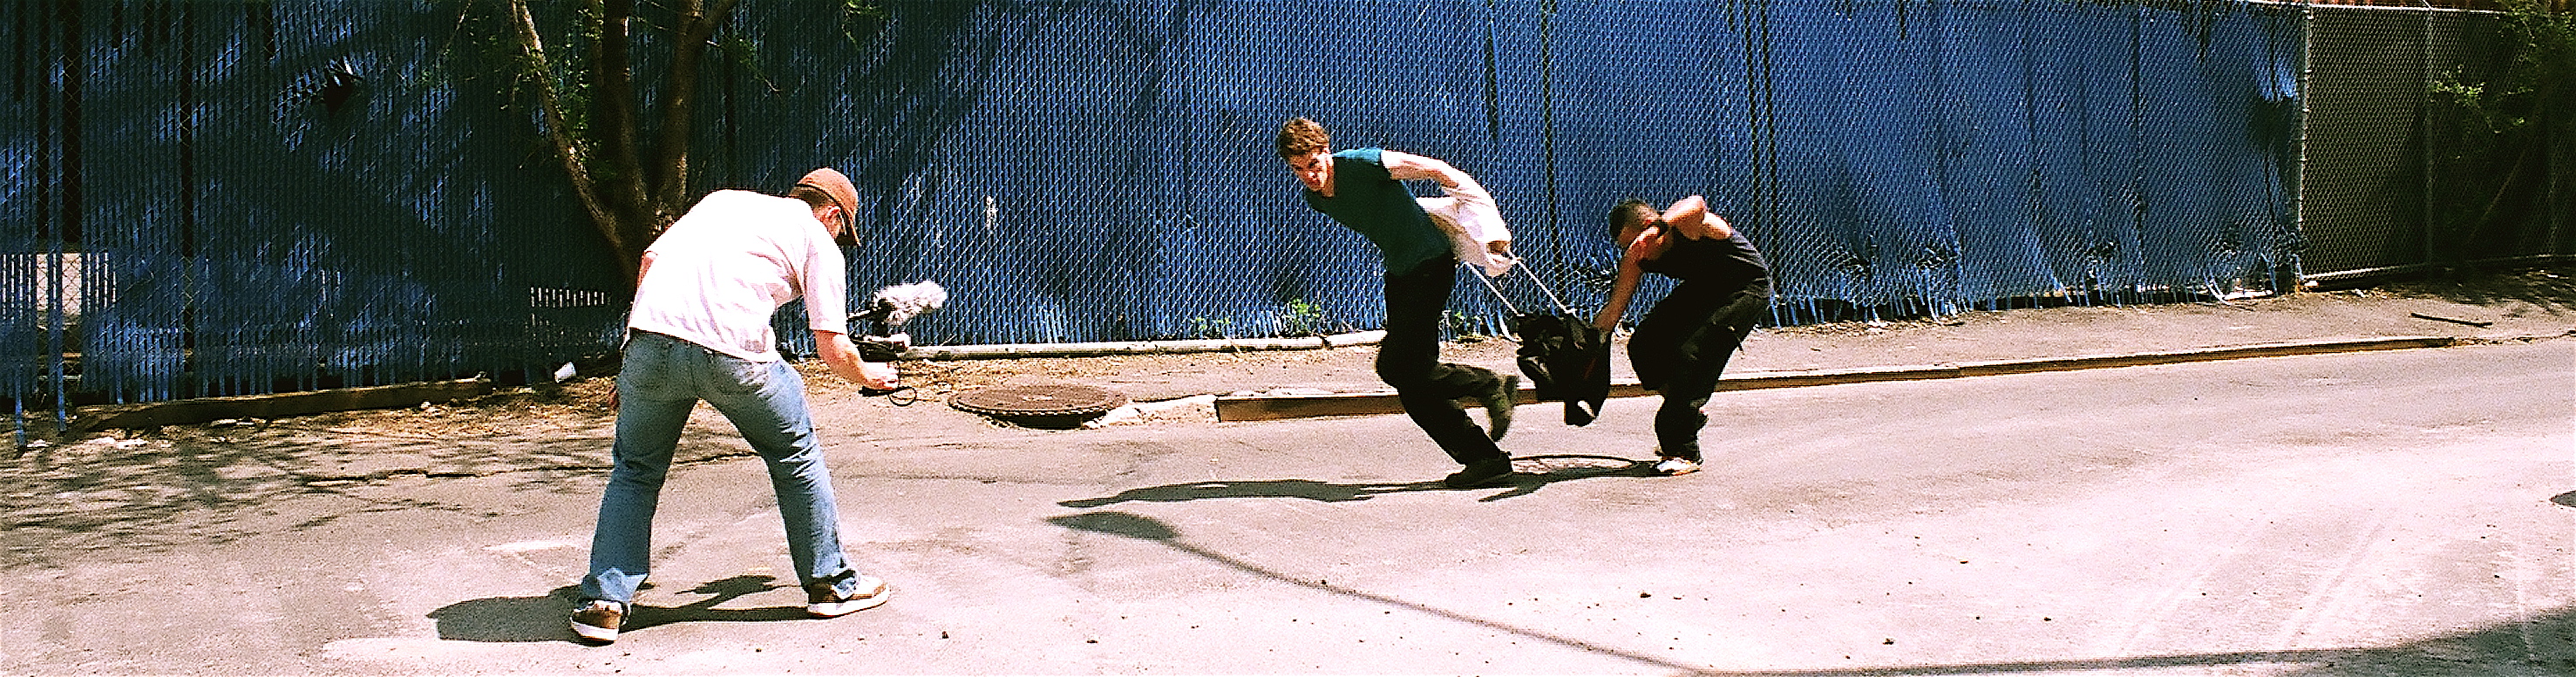 Production Still from Jesse's starring role in Under Penalty.